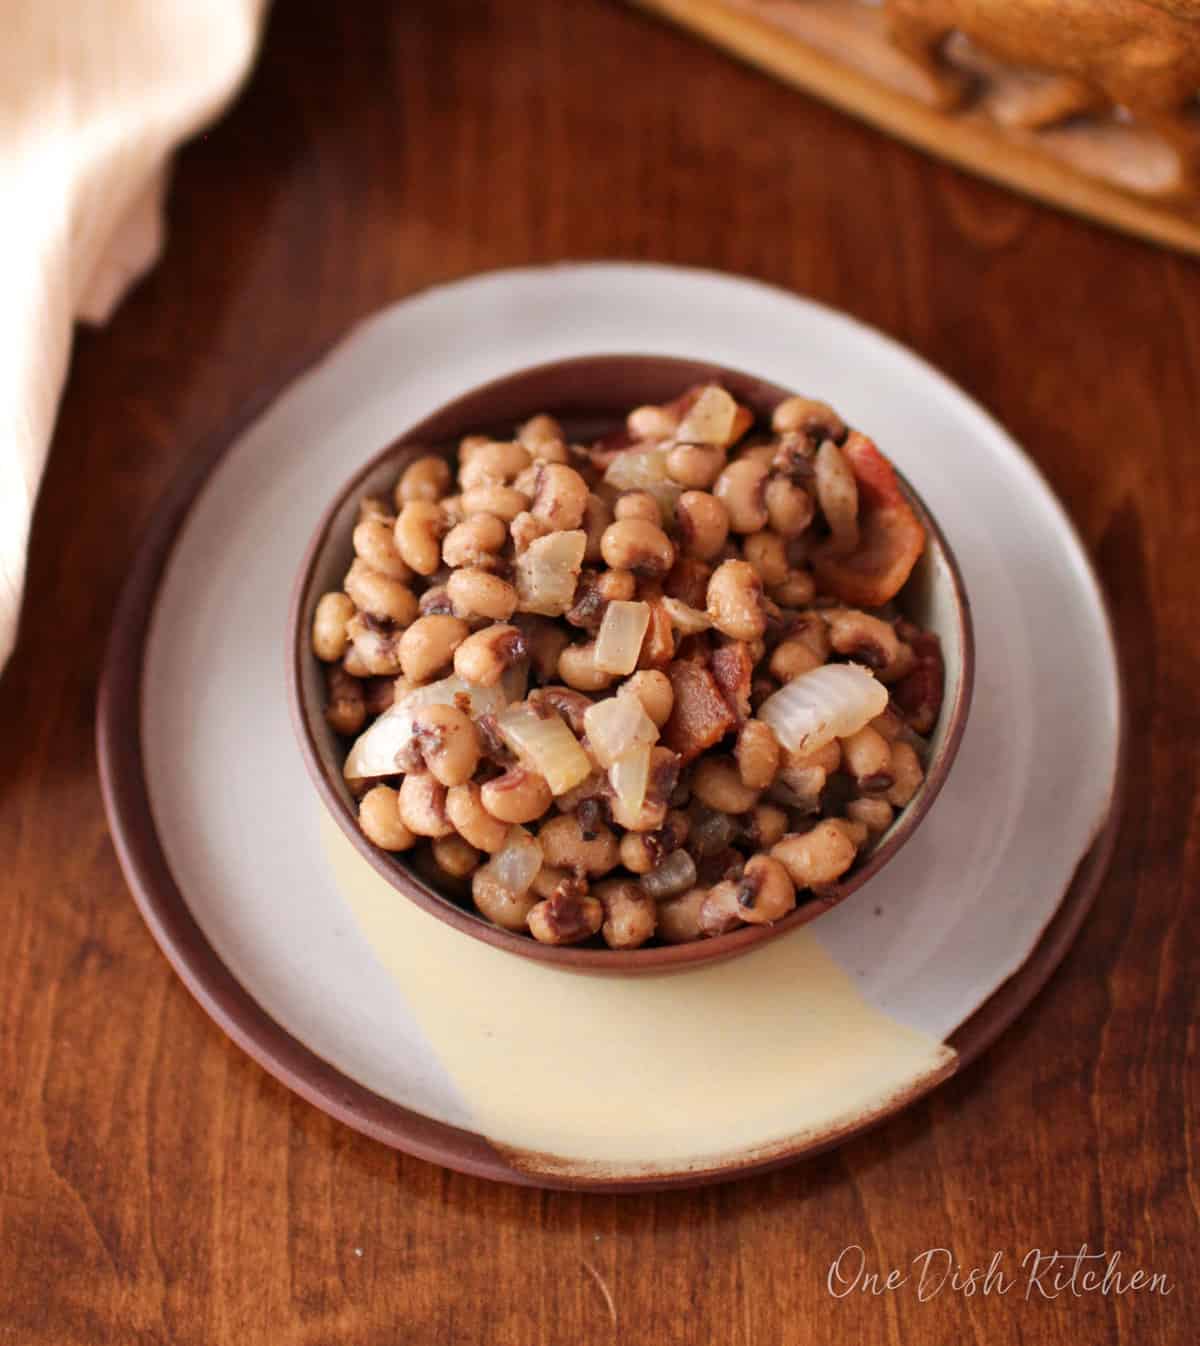 a bowl of black eyed peas on a wooden table next to a brown napkin.